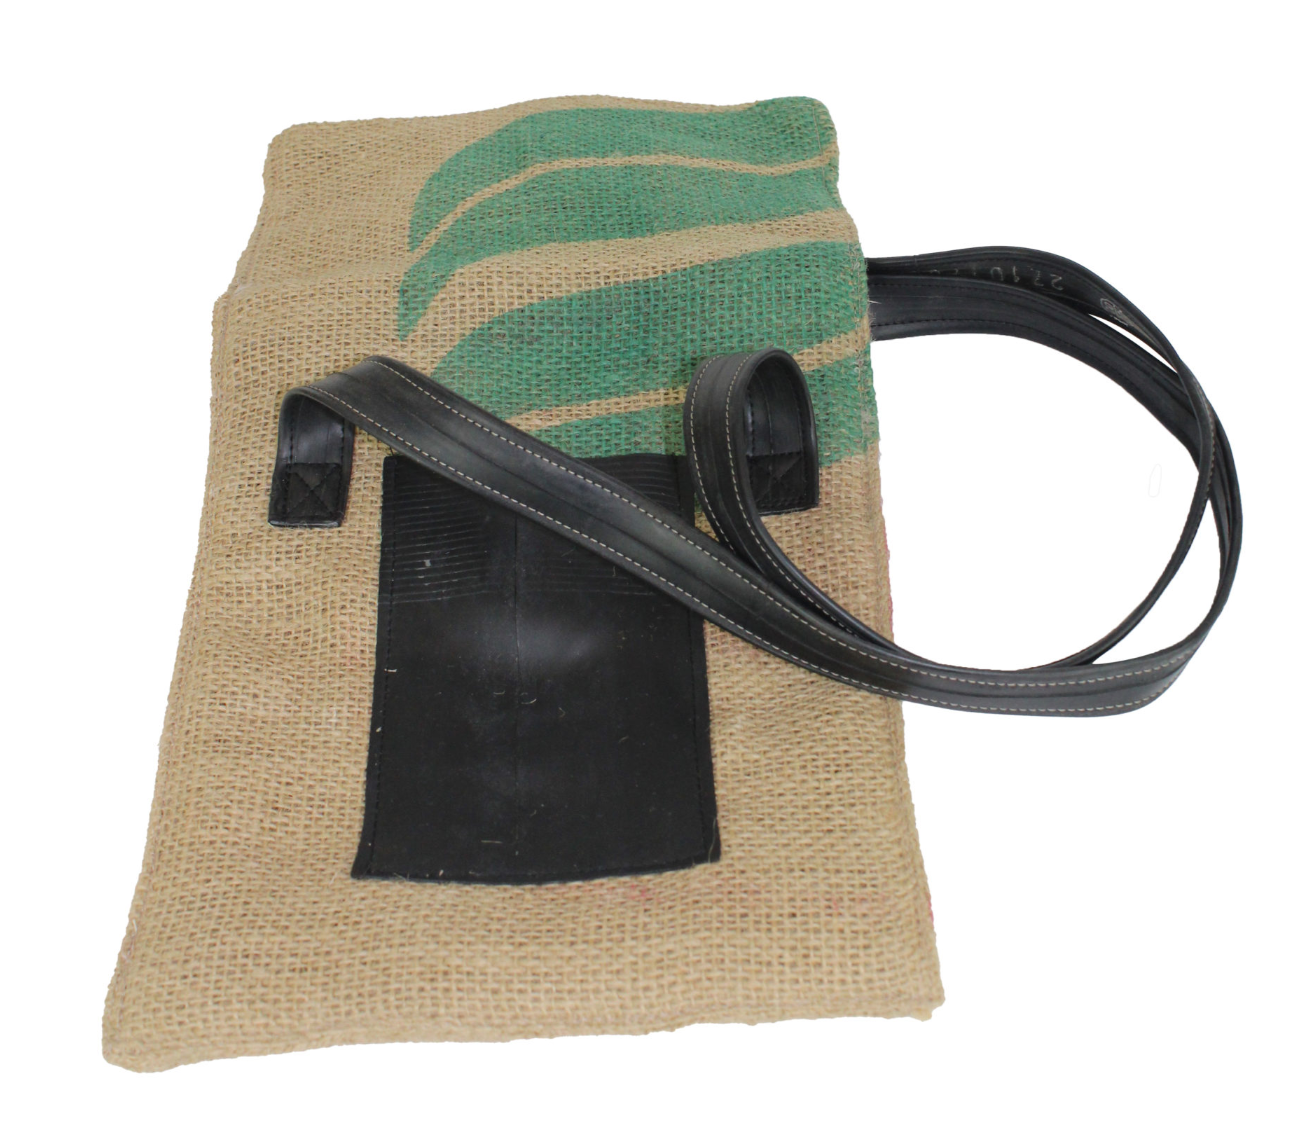 Crossover Bag (Coffee Sack) SMALL by Cycle of Good